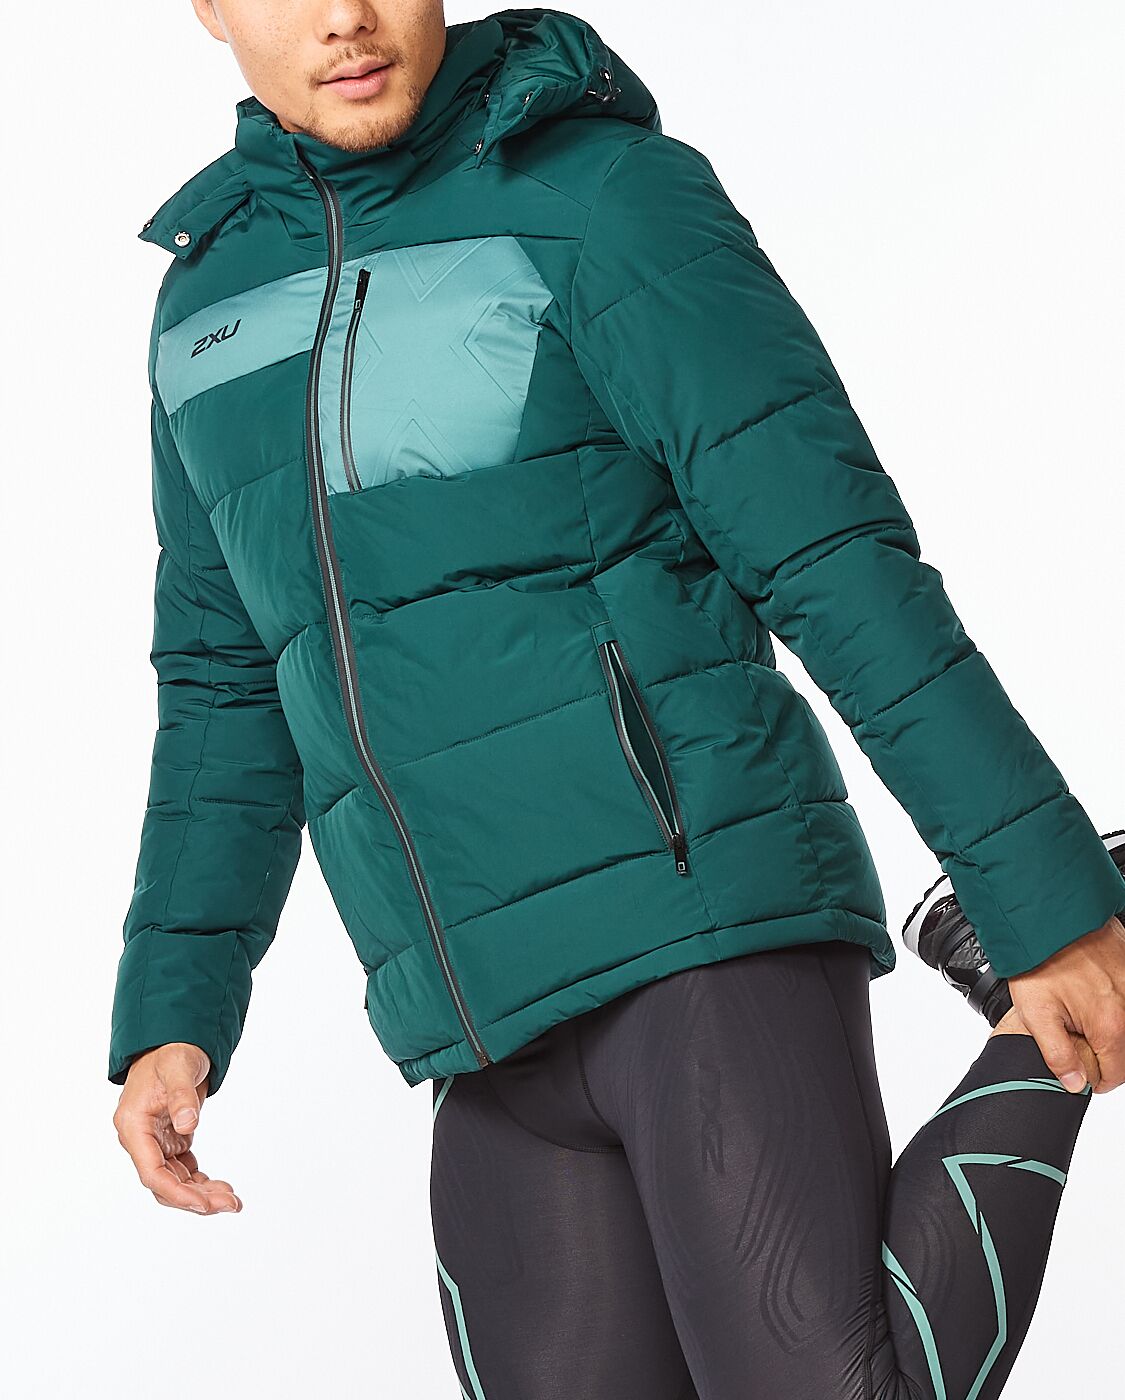 2XU South Africa - Mens Utility Insulation Jacket - Pine/Silver Sage